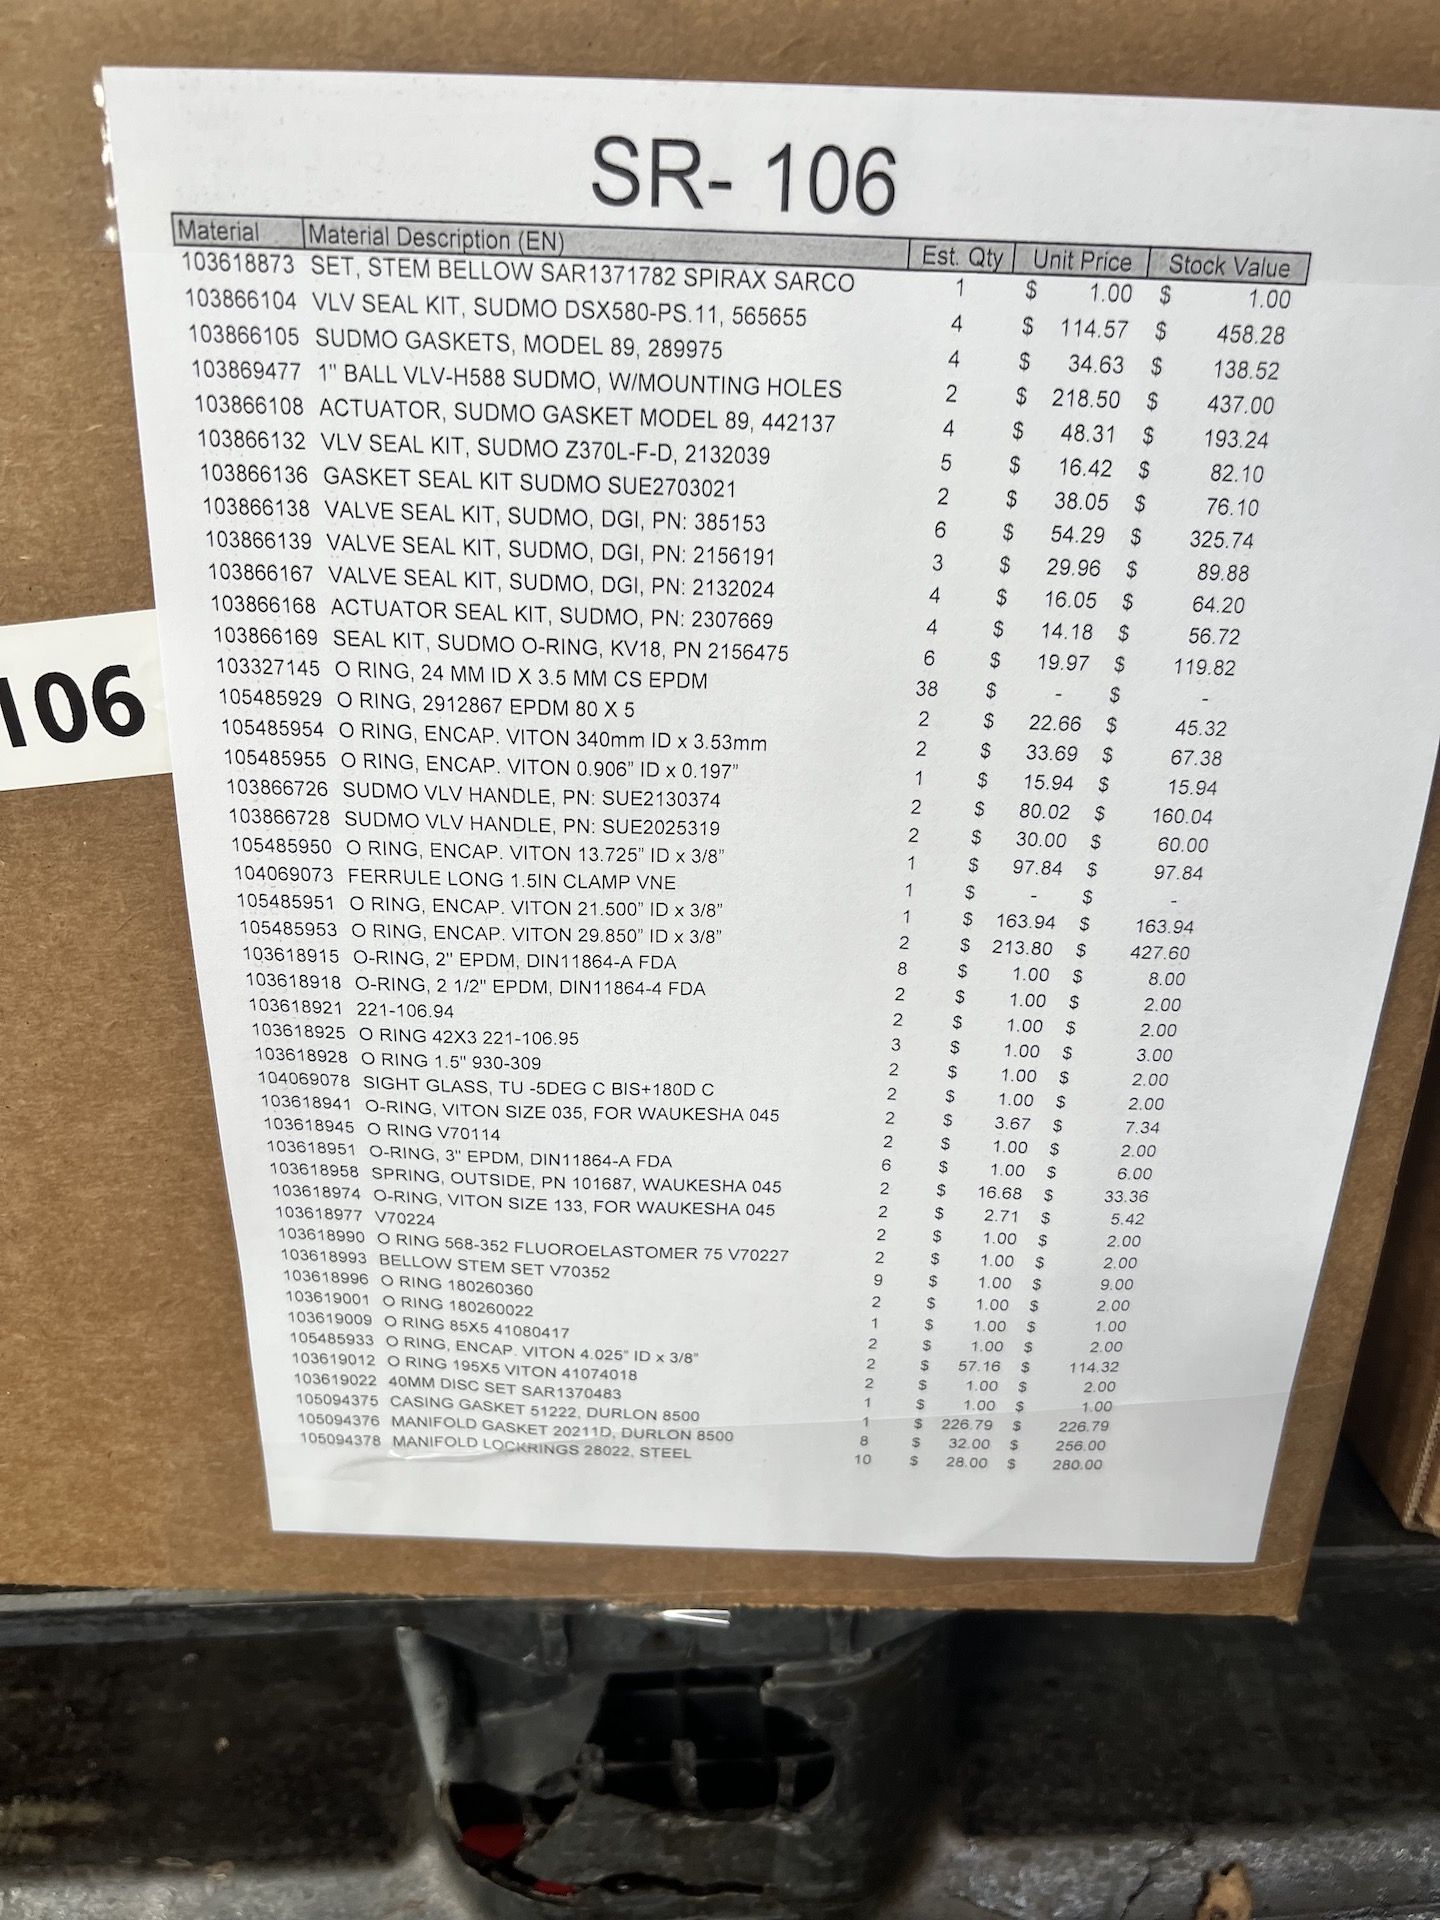 ASSORTED MRO AND SPARE PARTS, PLEASE SEE INVENTORY LISTS IN PHOTOS - Image 15 of 17